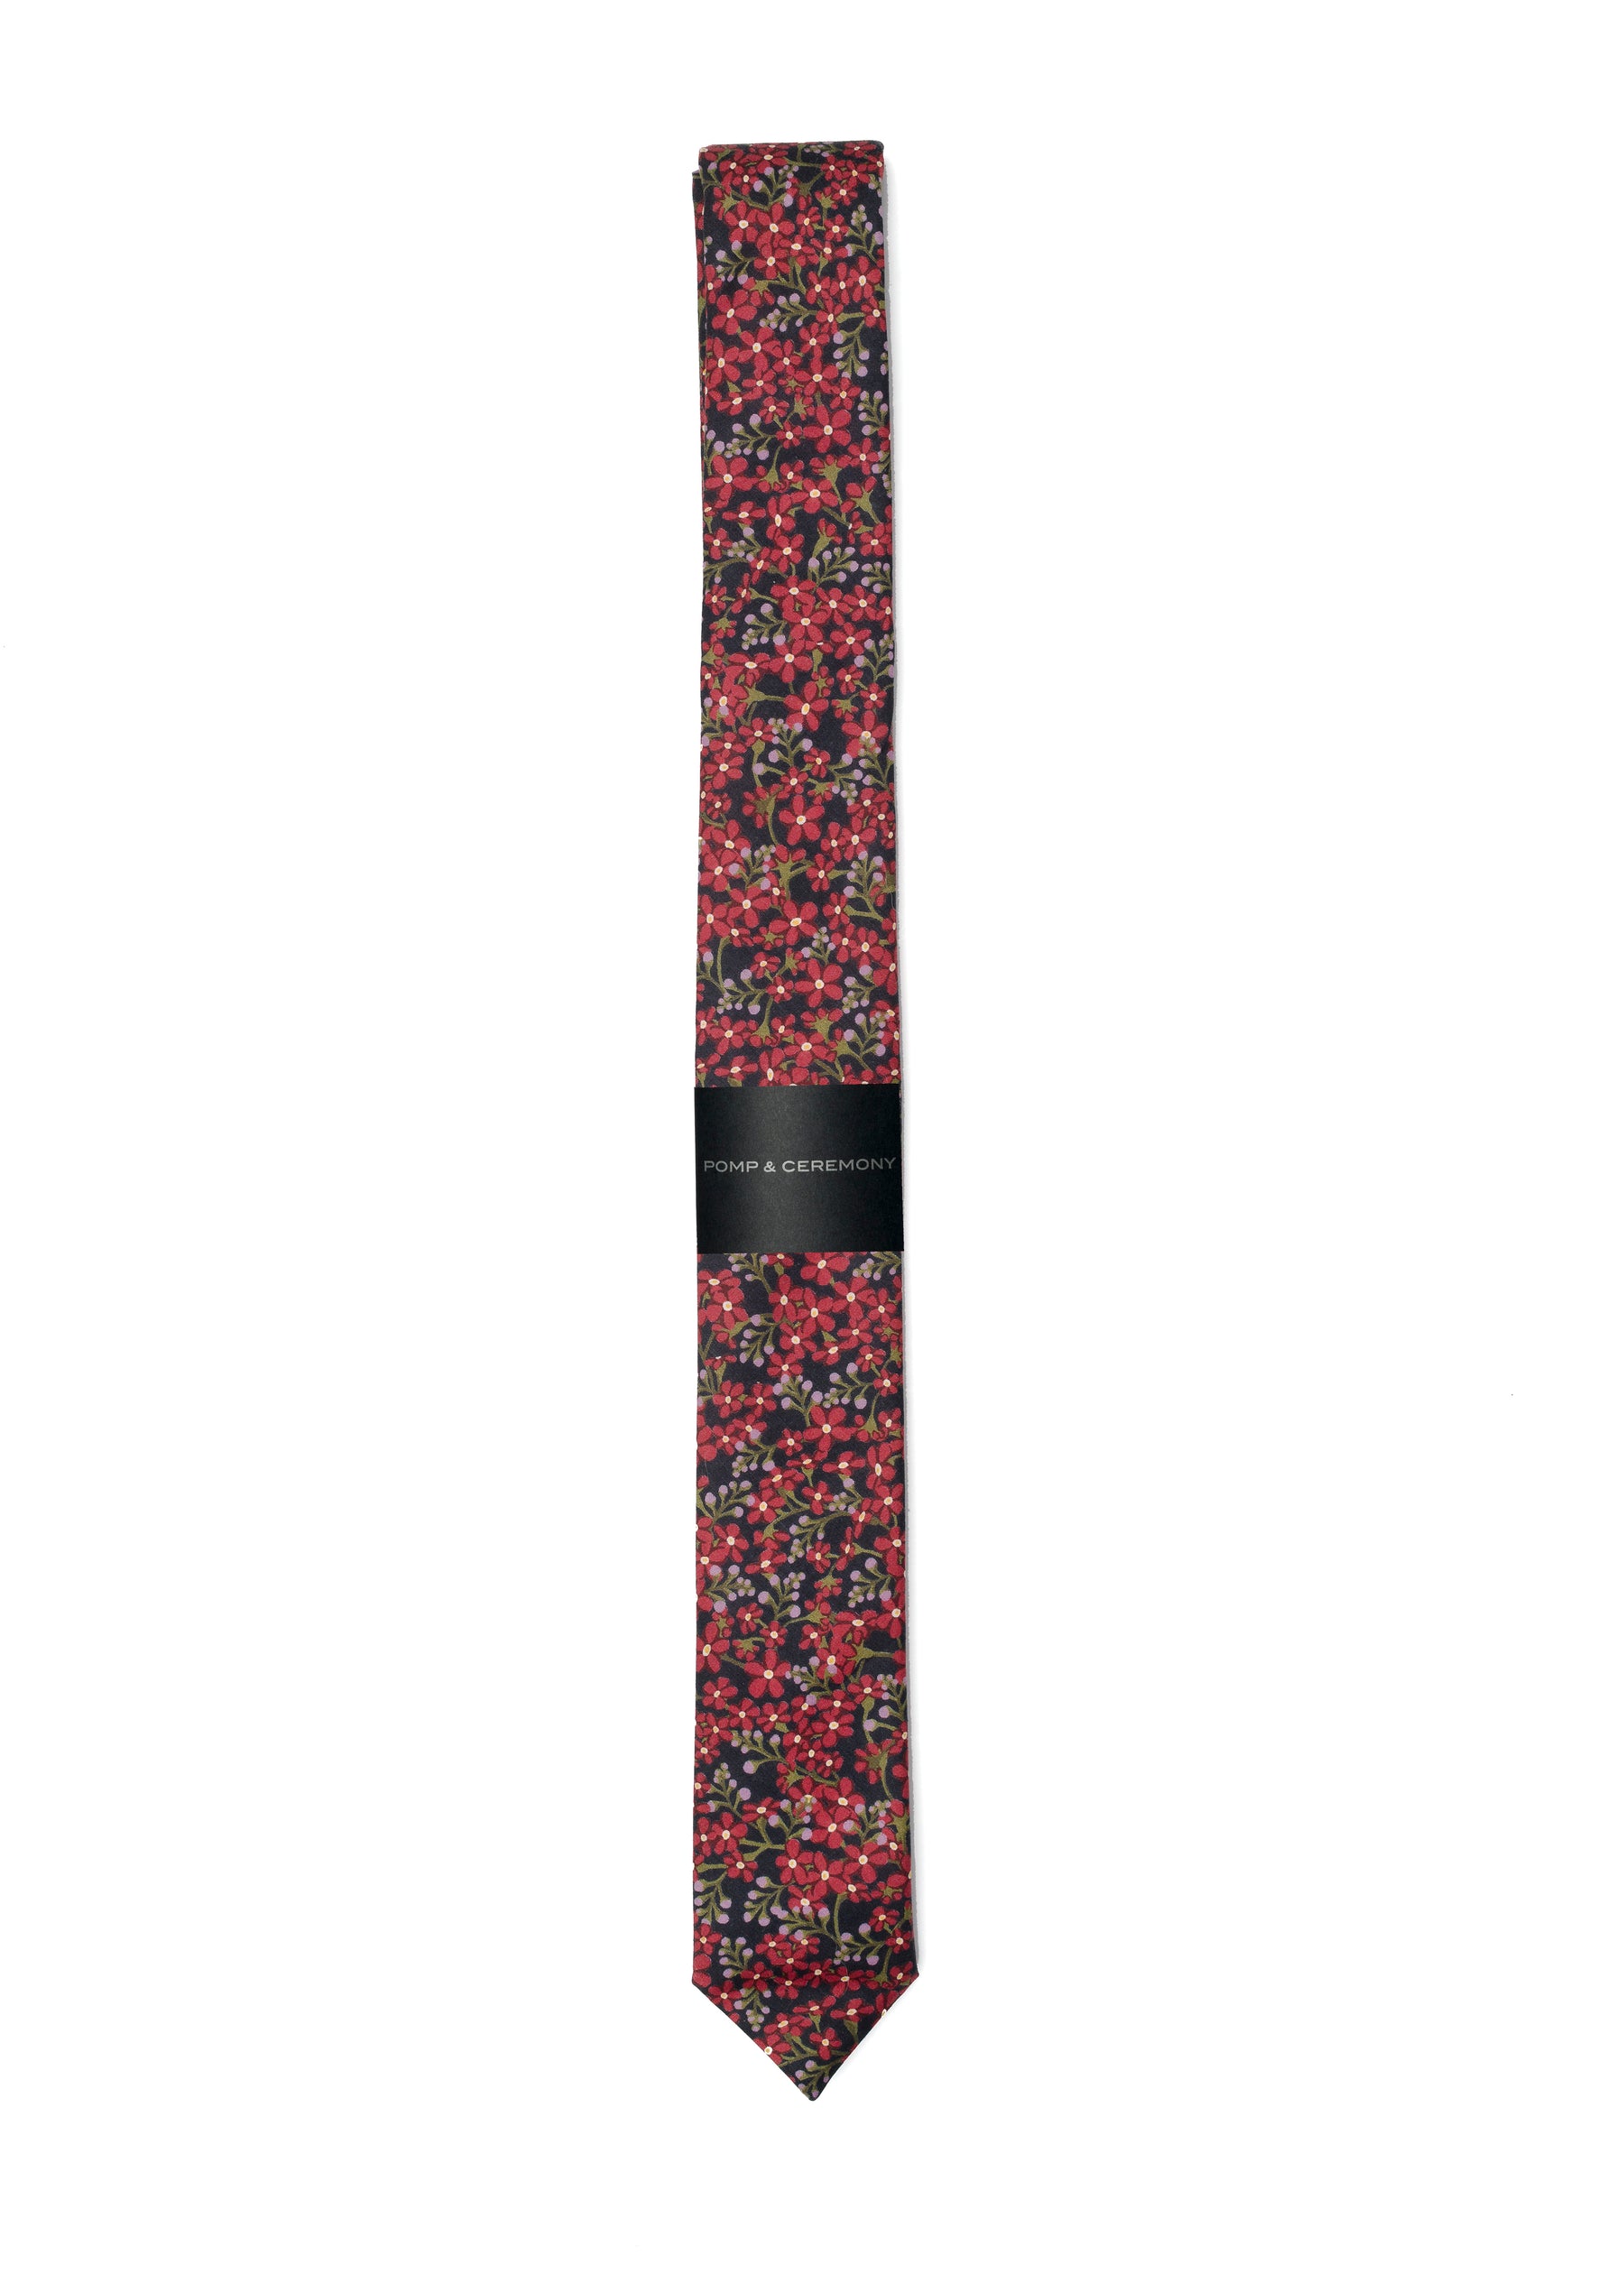 LIBERTY OF LONDON STAR ANISE SKINNY TIE